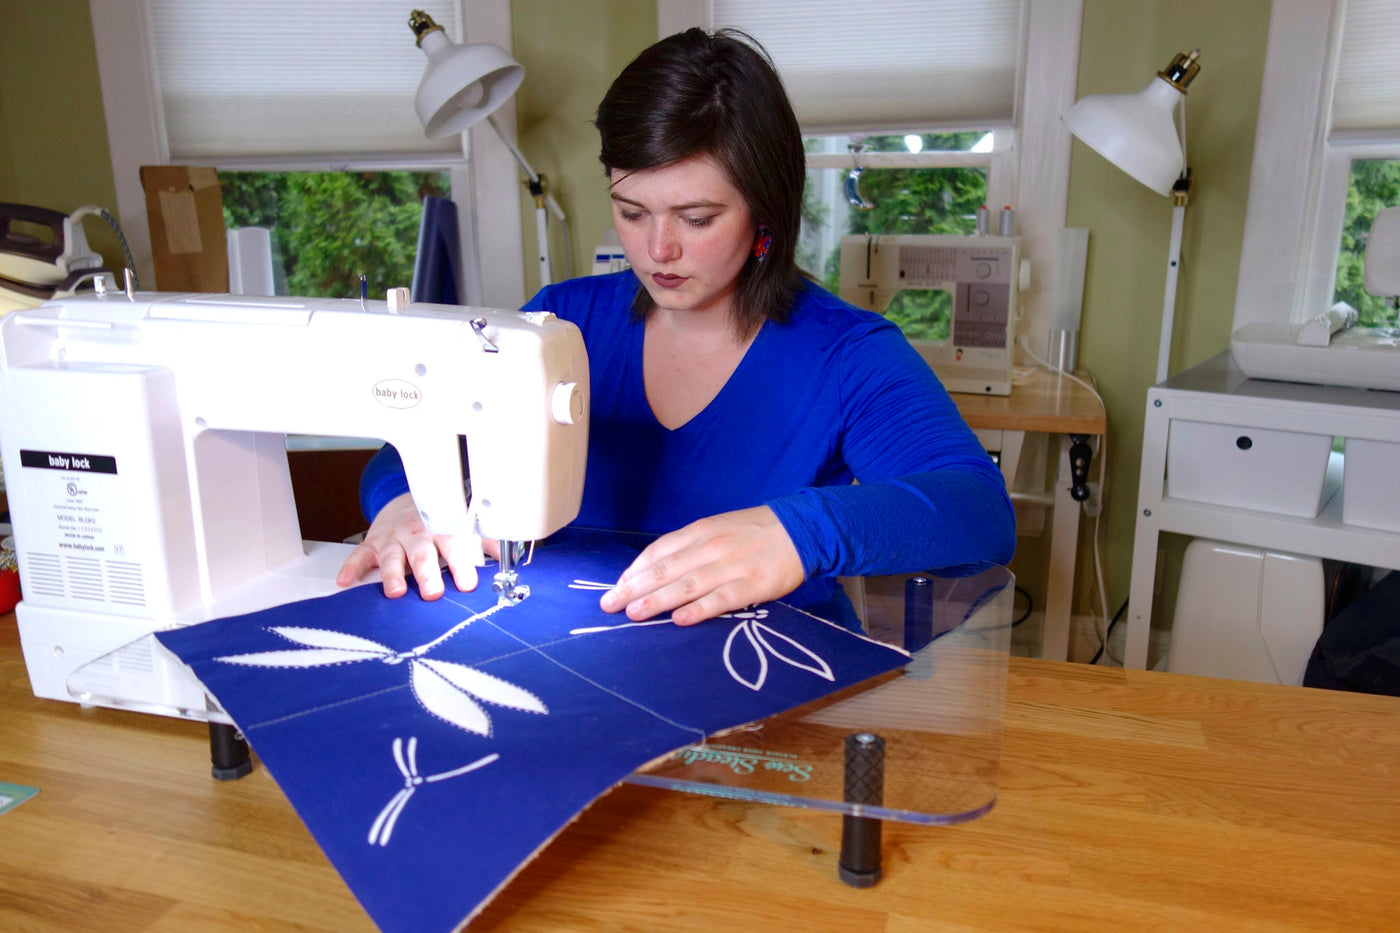 Victoria Stone of Okan Arts stitches a practice quilt tile with the Baby Lock Sashiko 2 machine